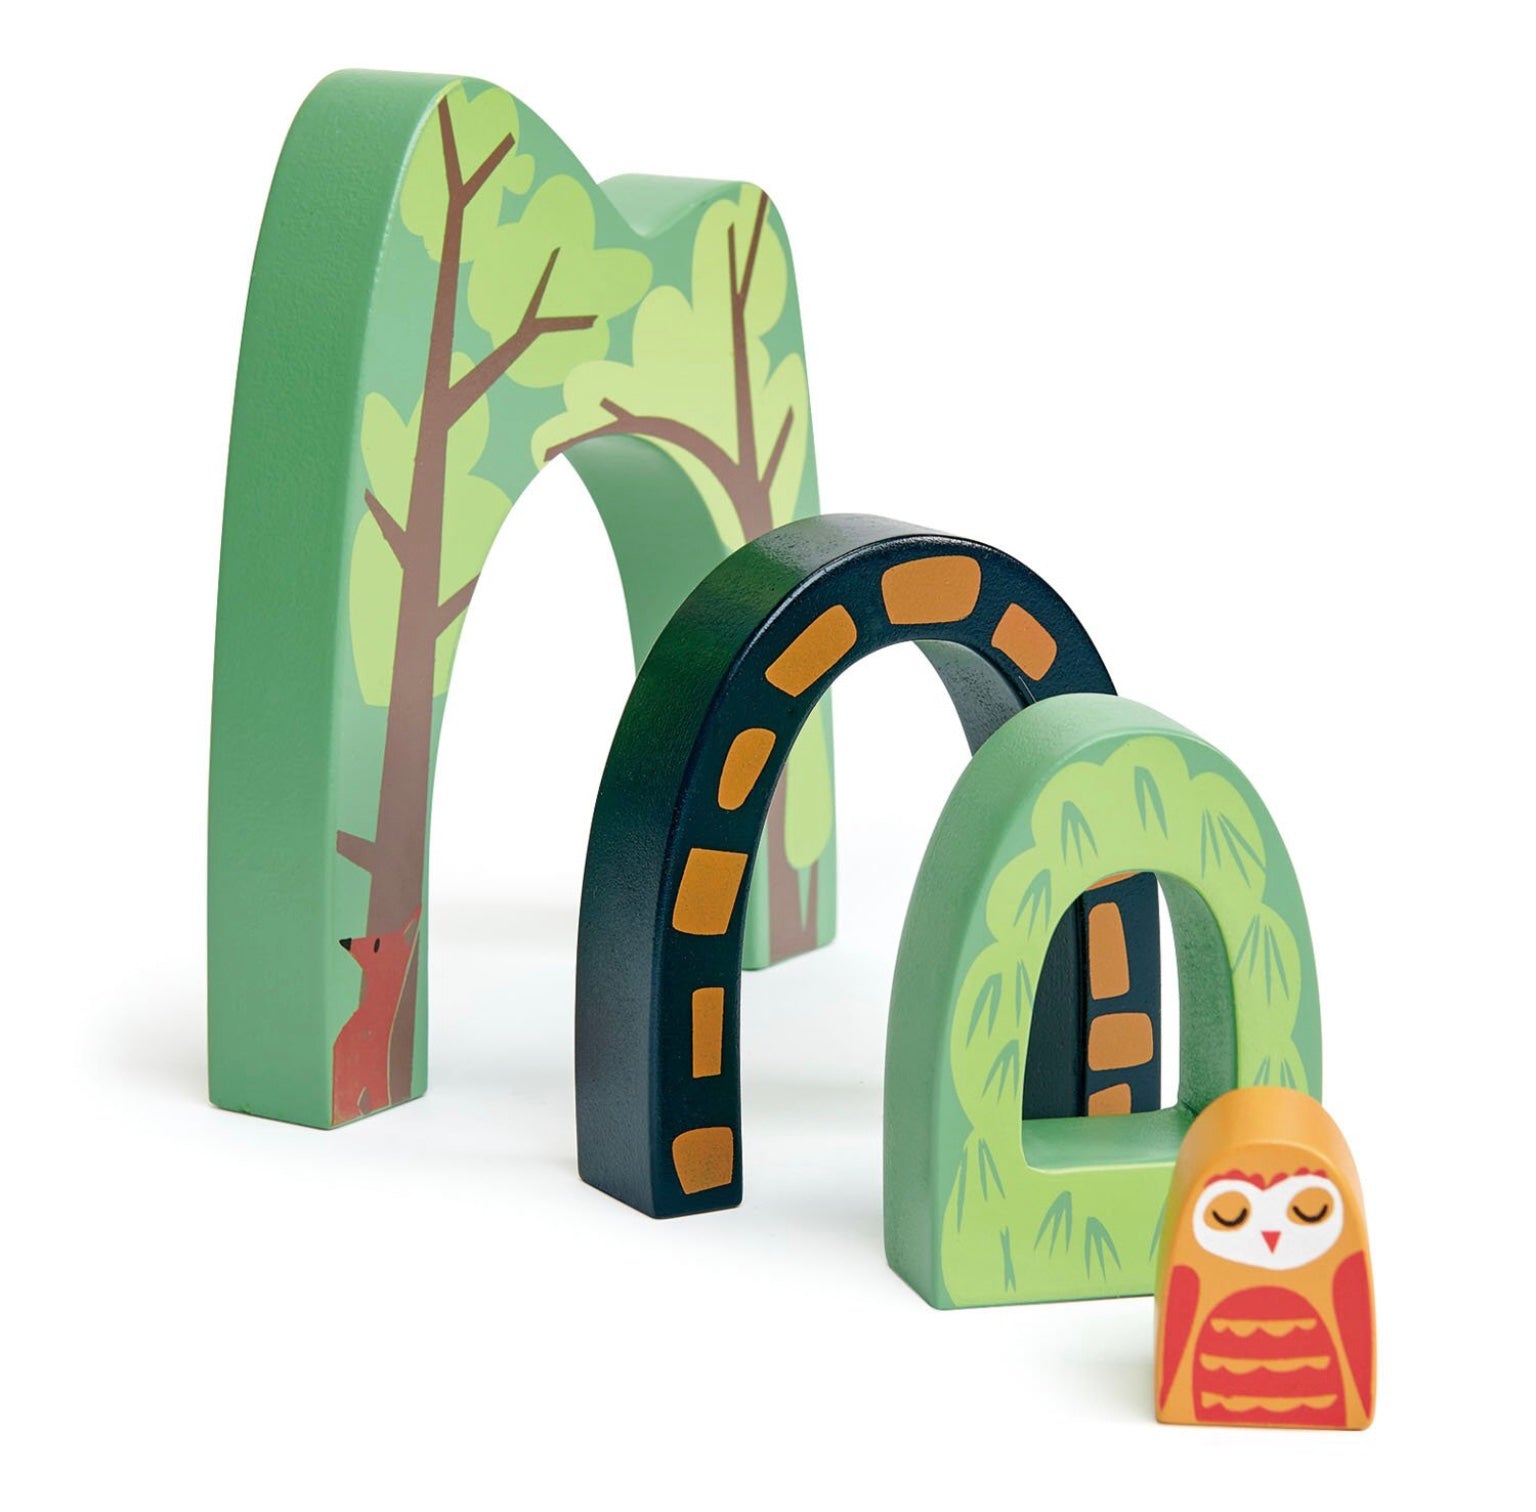 Tender Leaf  Toys Forest Tunnels Wooden Toy